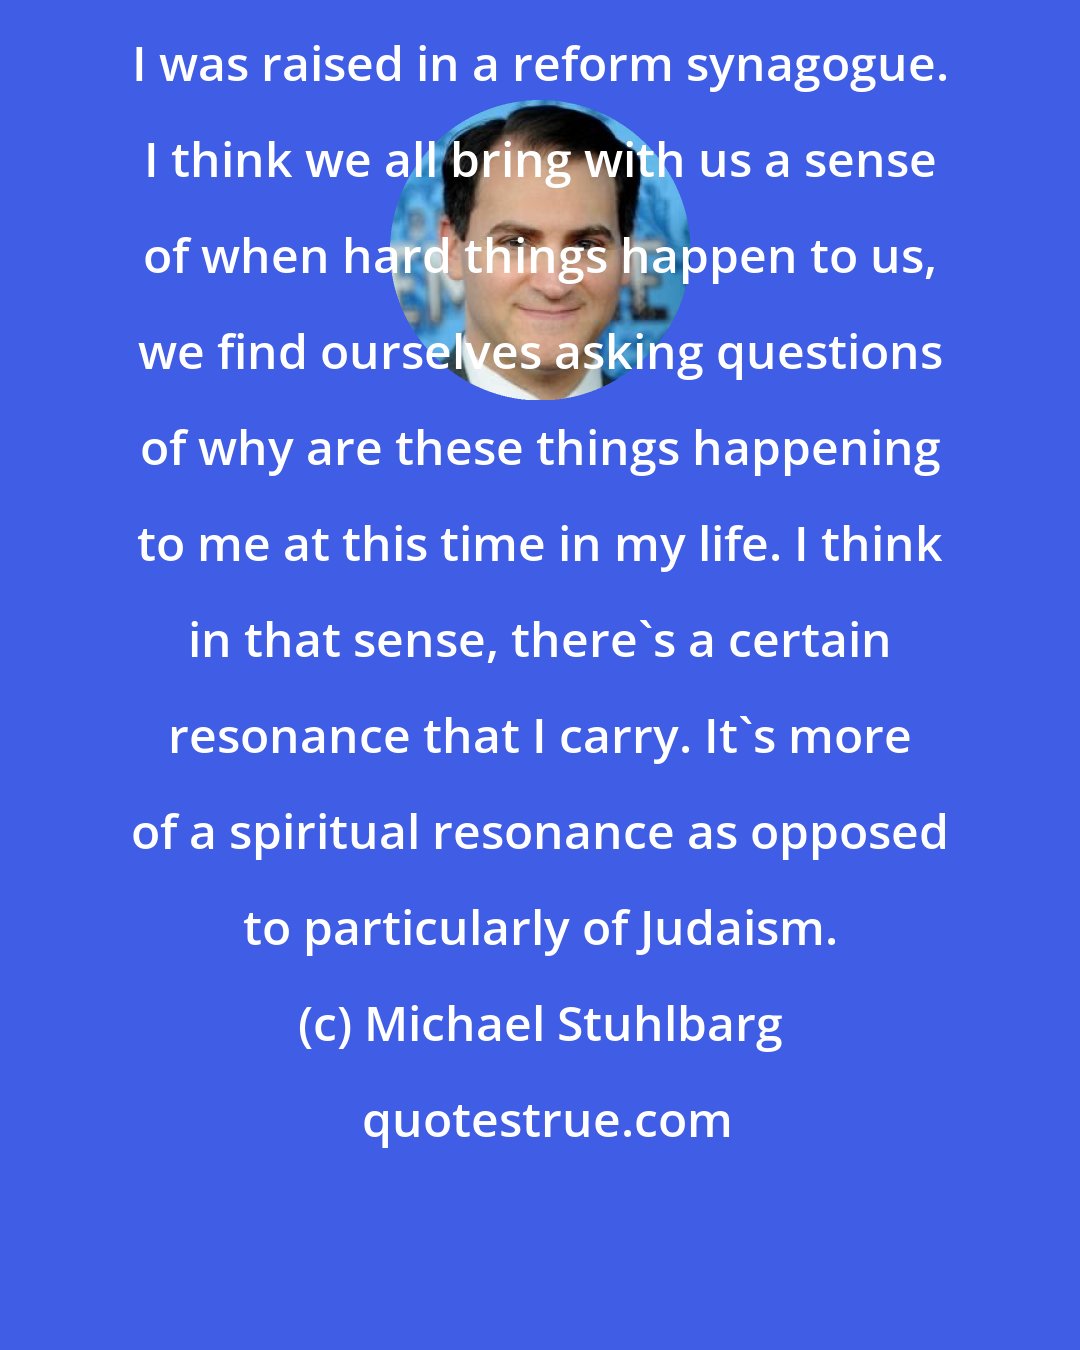 Michael Stuhlbarg: I was raised in a reform synagogue. I think we all bring with us a sense of when hard things happen to us, we find ourselves asking questions of why are these things happening to me at this time in my life. I think in that sense, there's a certain resonance that I carry. It's more of a spiritual resonance as opposed to particularly of Judaism.